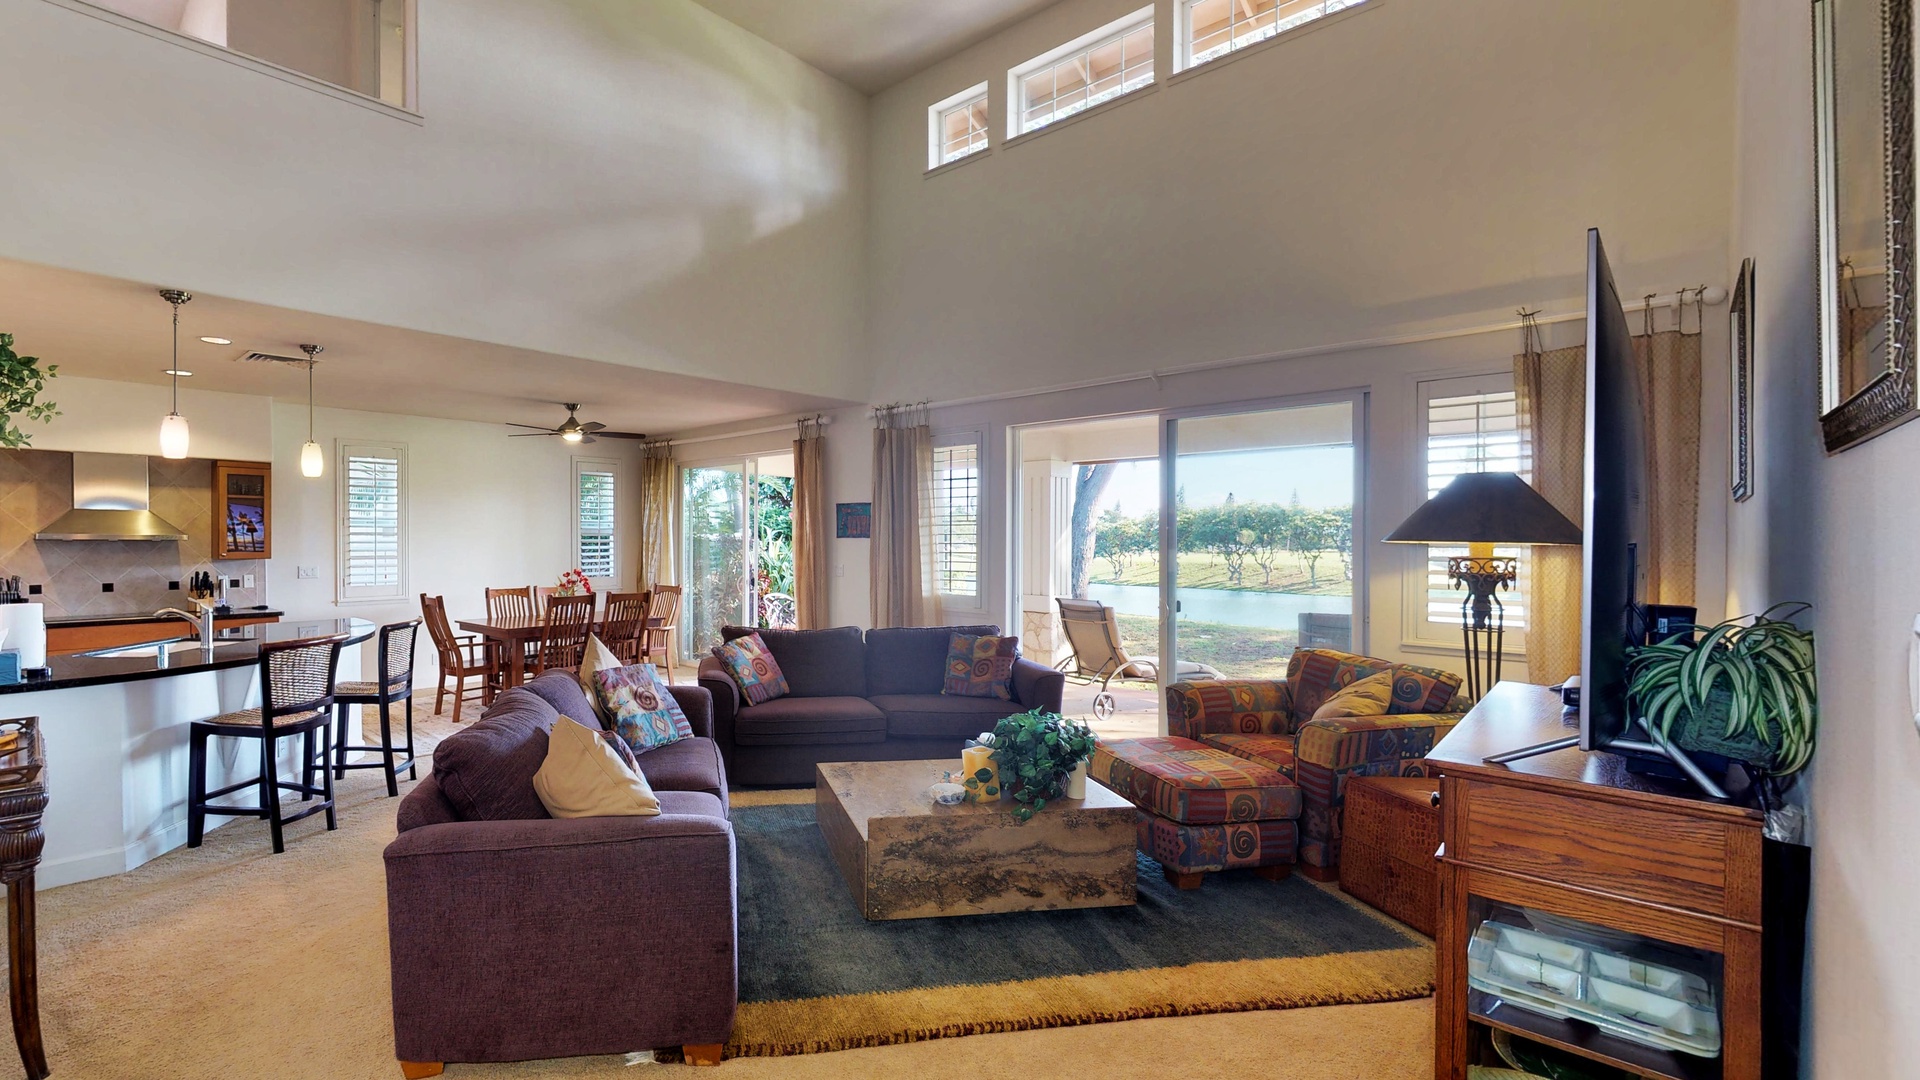 Kapolei Vacation Rentals, Ko Olina Kai Estate #17 - Spacious and comfy living area with a view of the Golf Course.